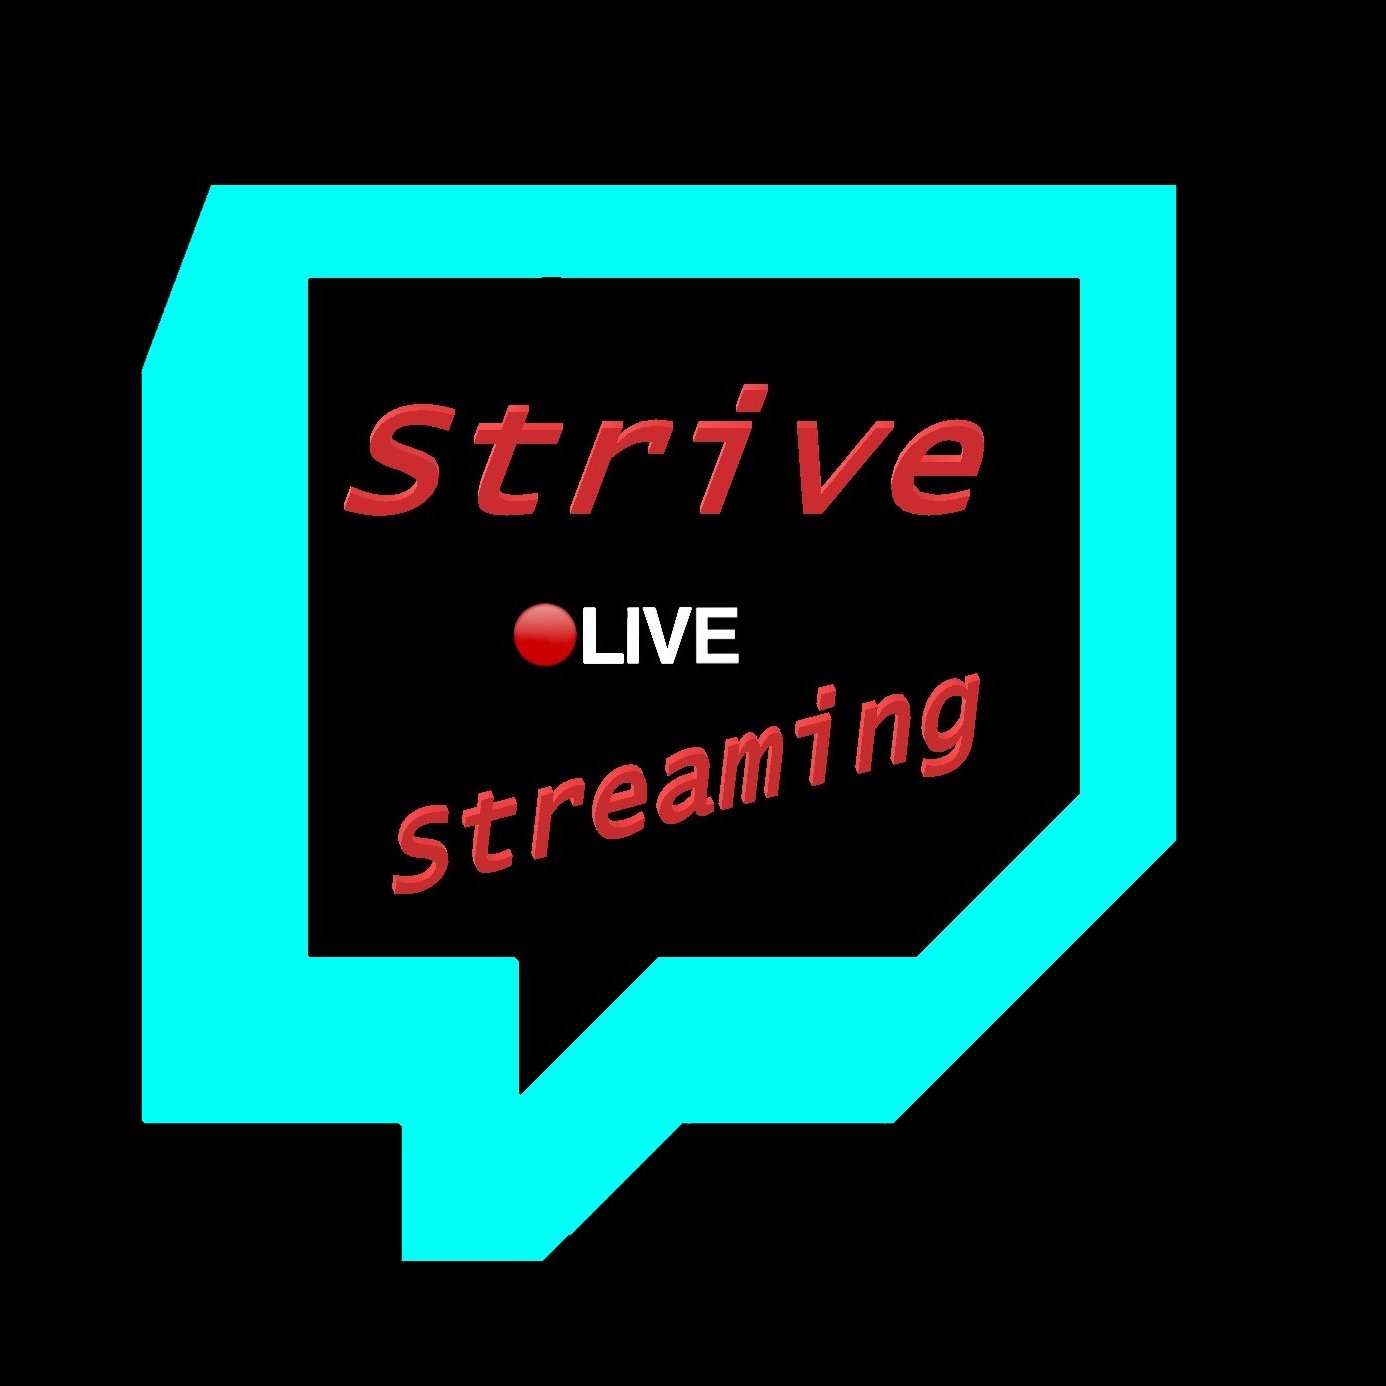 I Will retweet you. Support for Small Streamers. F4F. Tag me @StriveStream When You Go LIVE!